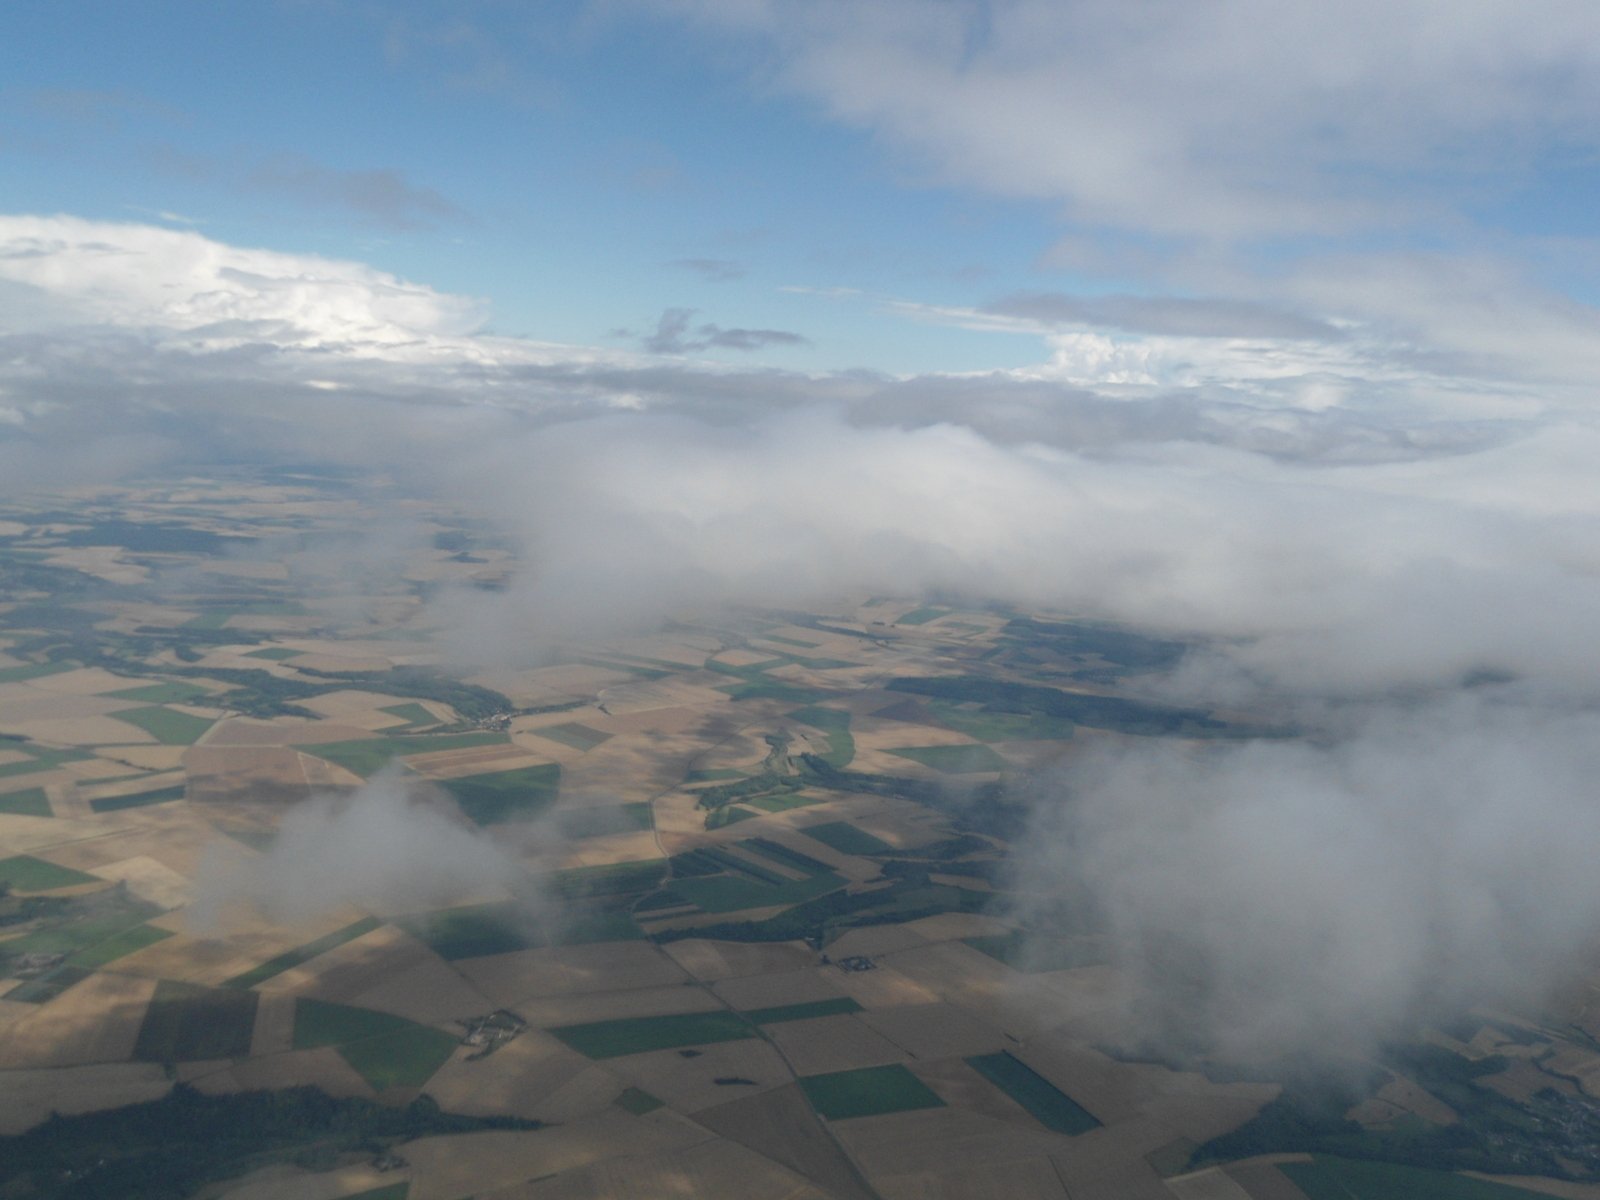 clouds rolling over farm land from an airplane